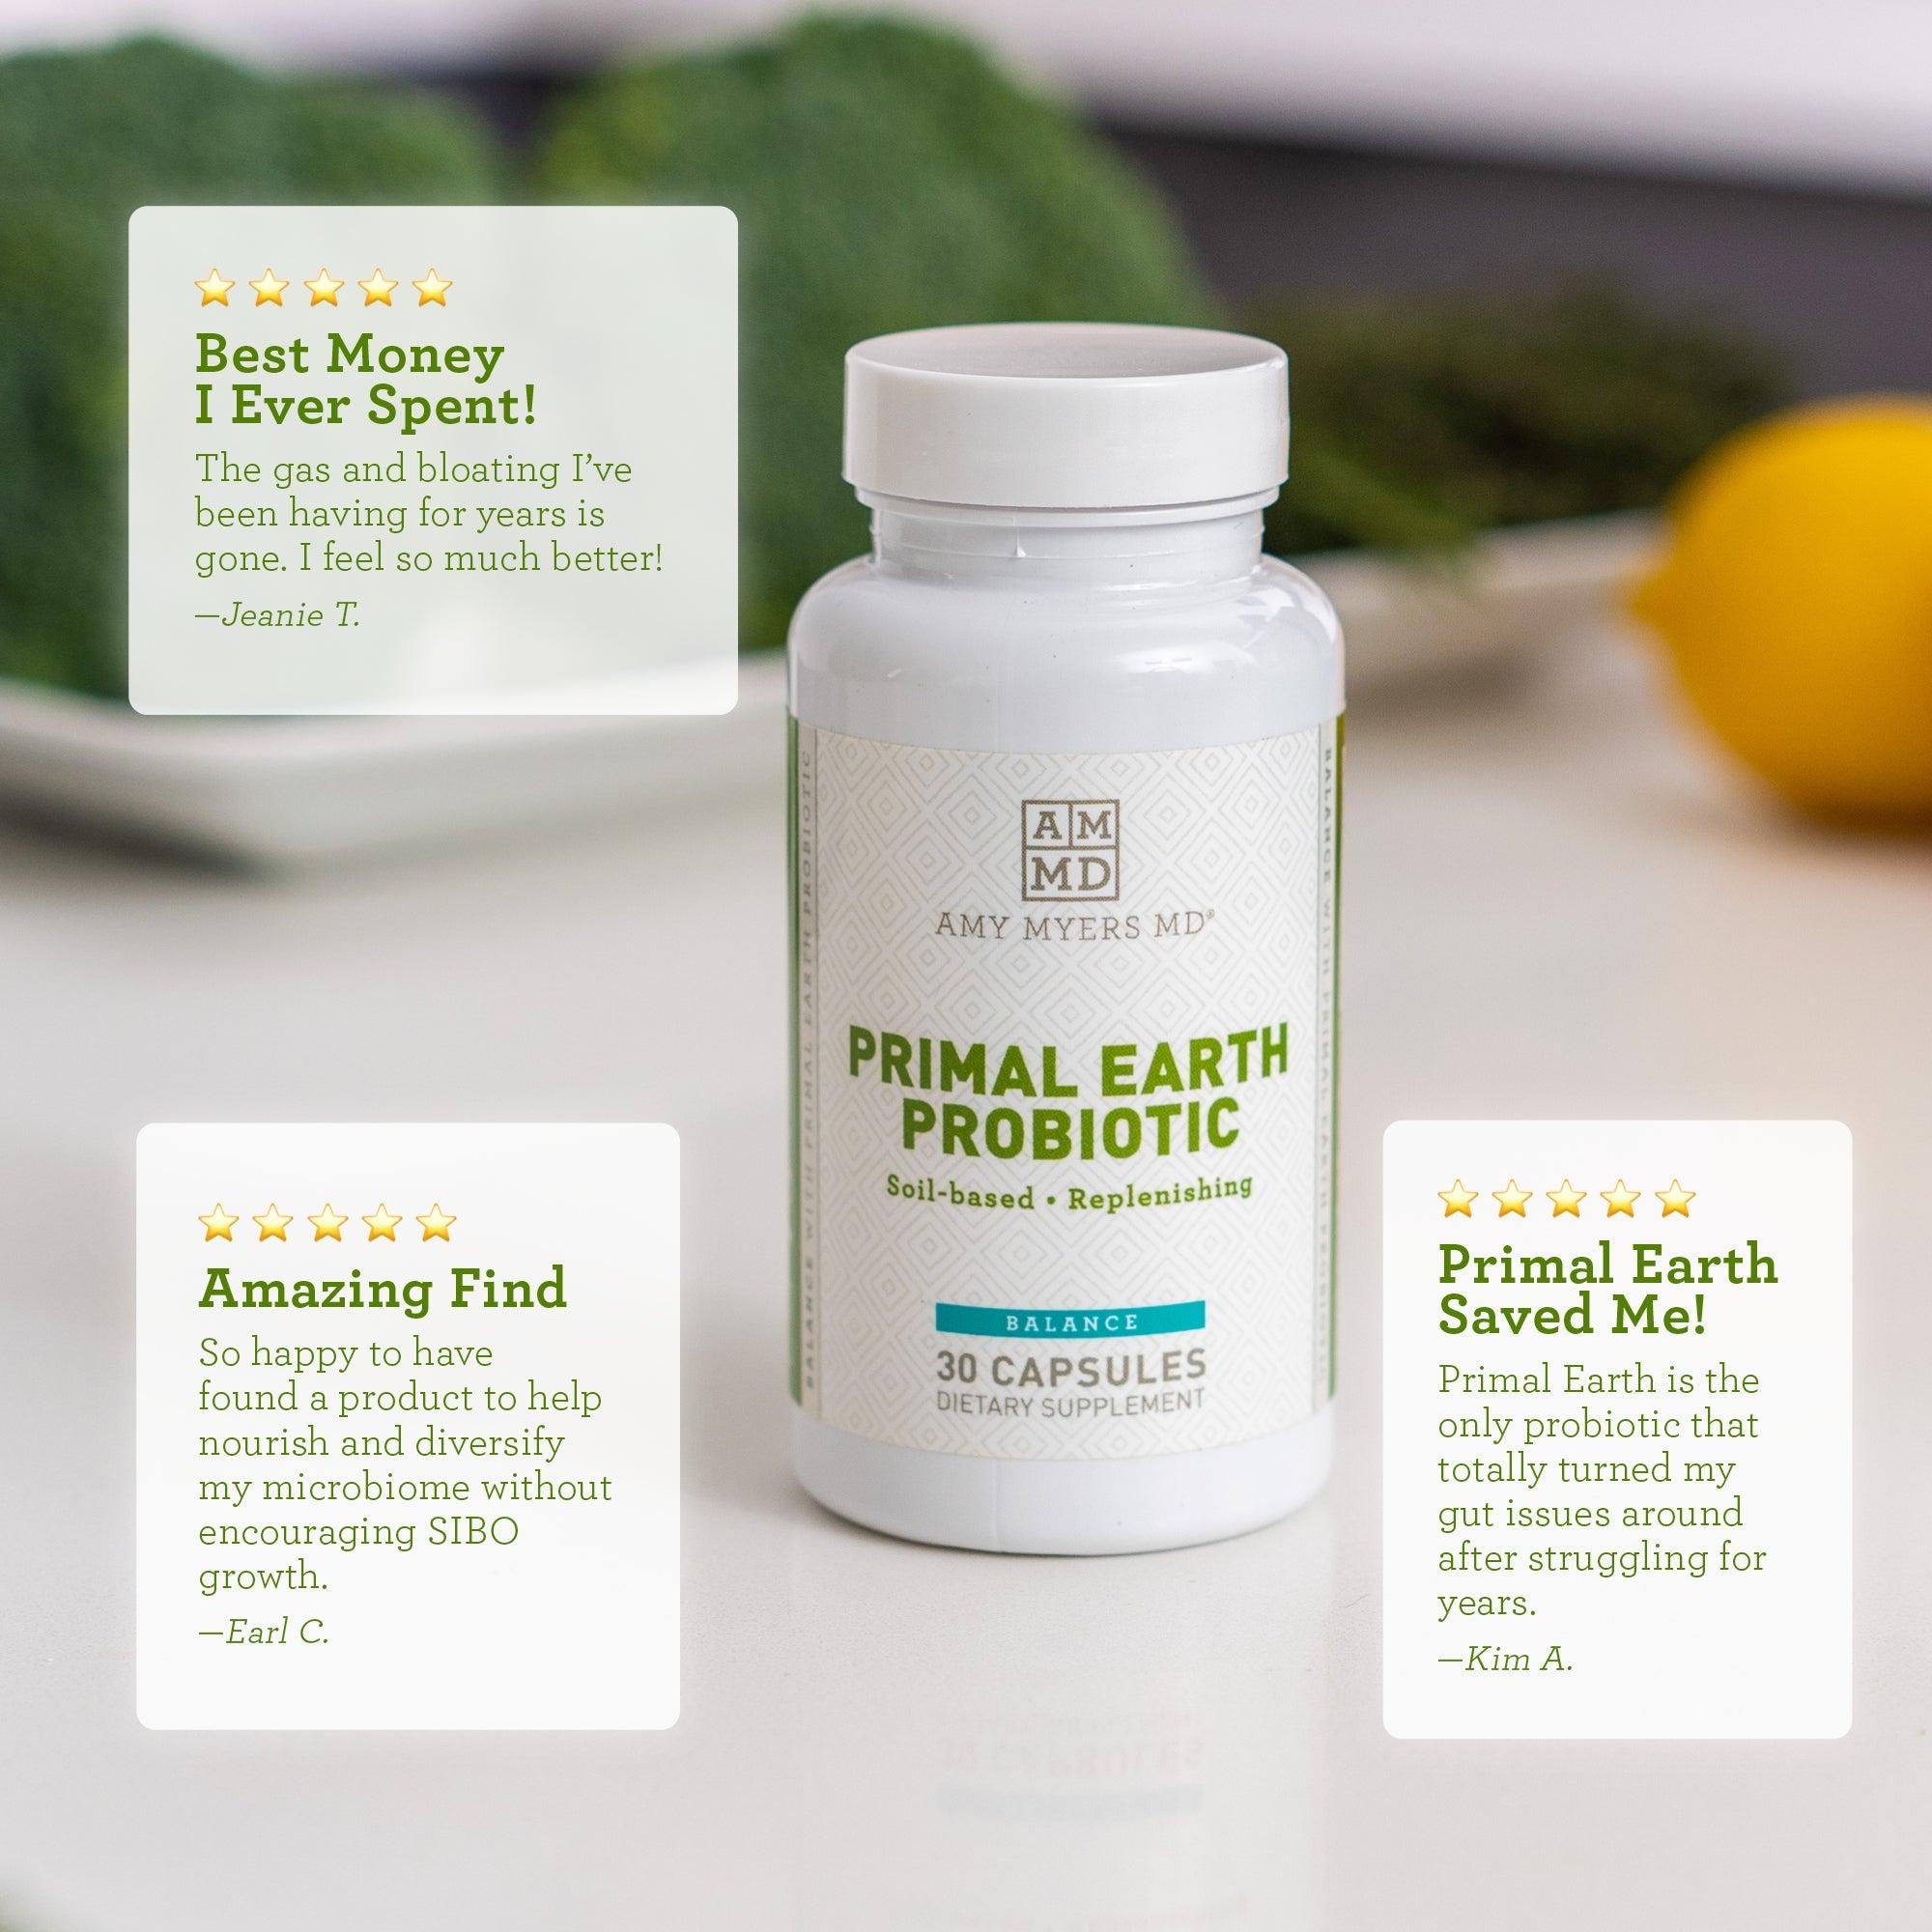 A bottle of Primal Earth Probiotic Supplement on a tabletop with fruits and vegetables, and some reviews - Reviews Image - Amy Myers MD®